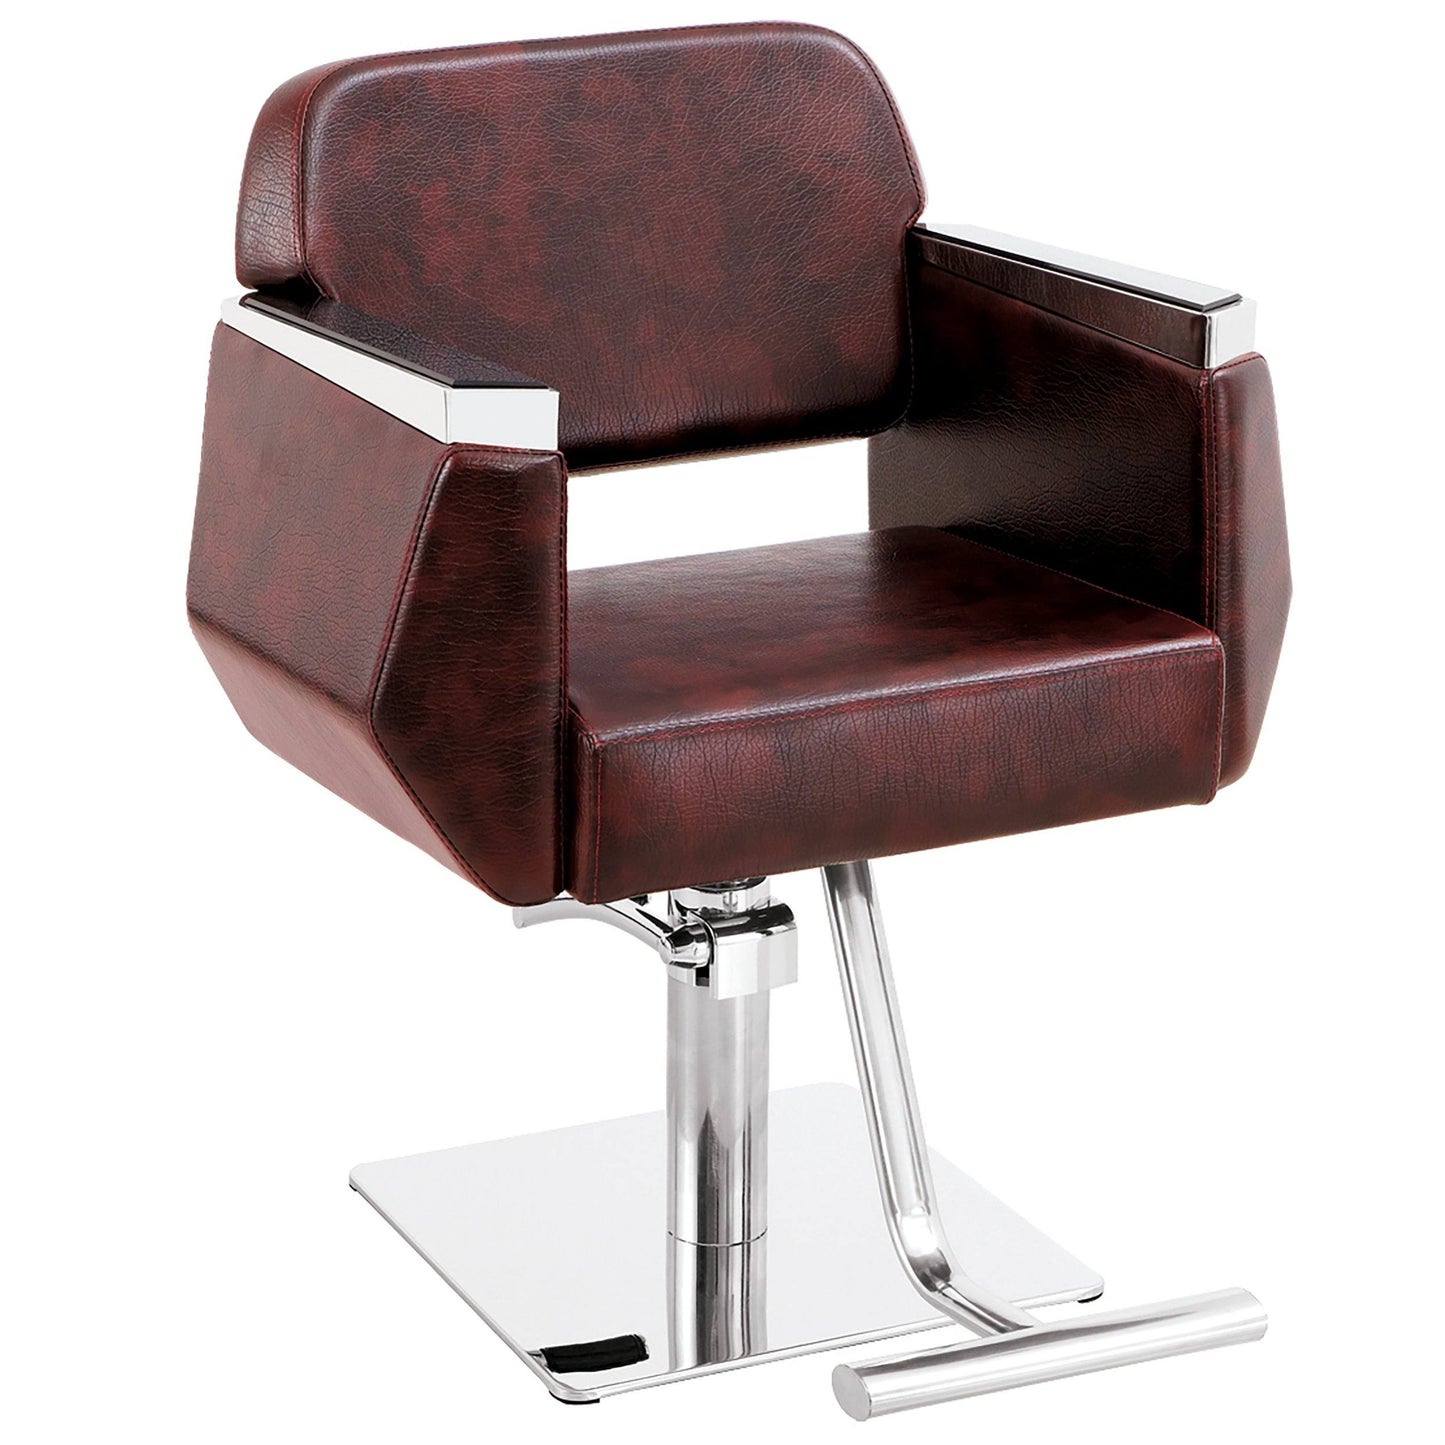 M-2205 STYLING CHAIRS SSW Wine 